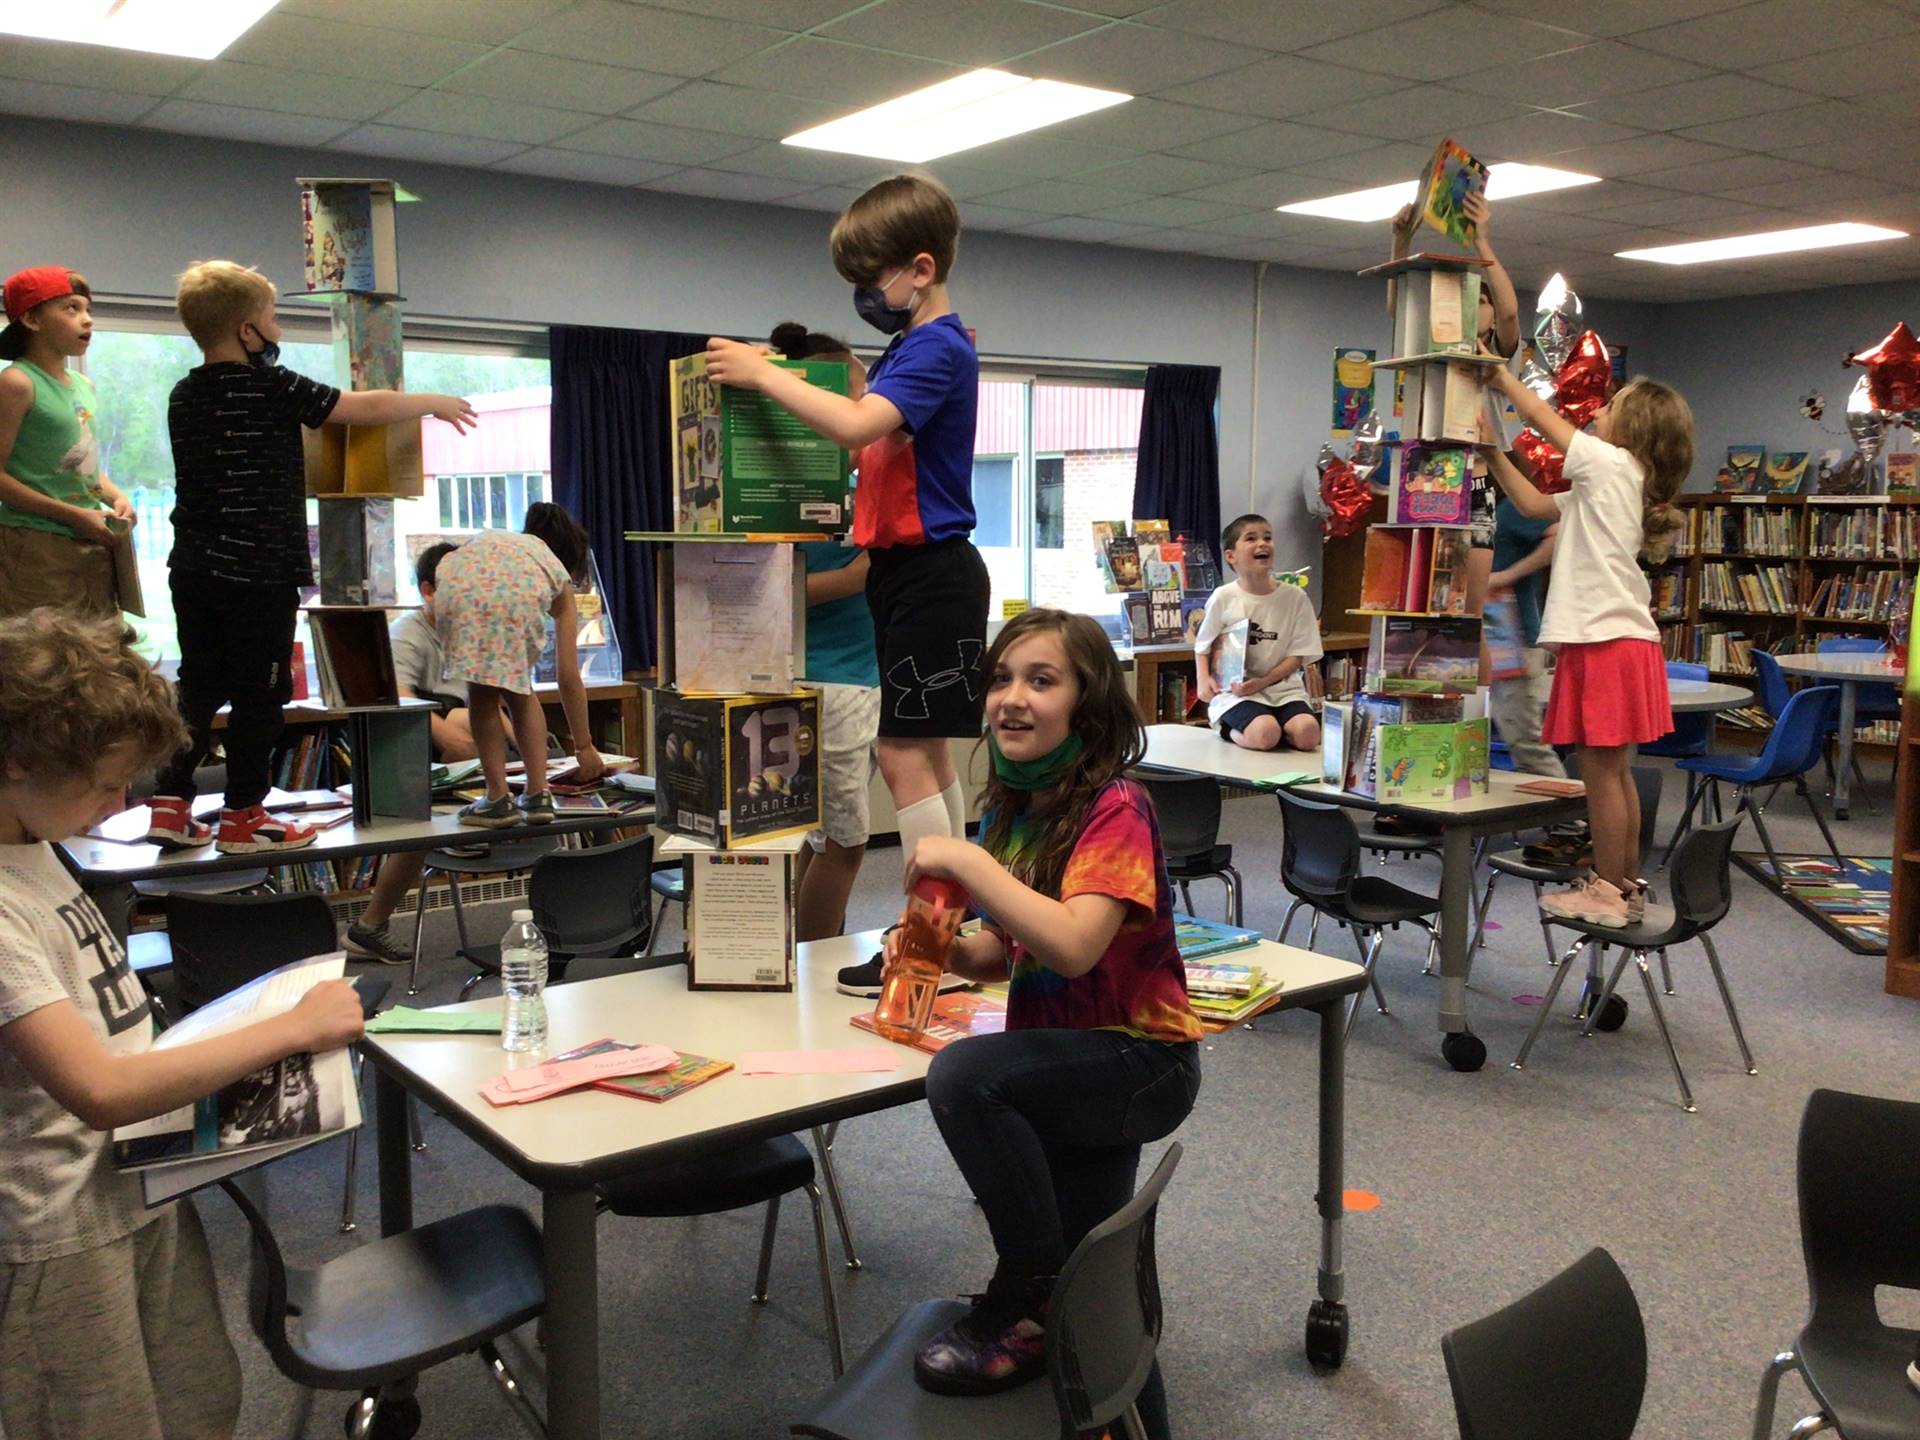 students doing building activity in the library